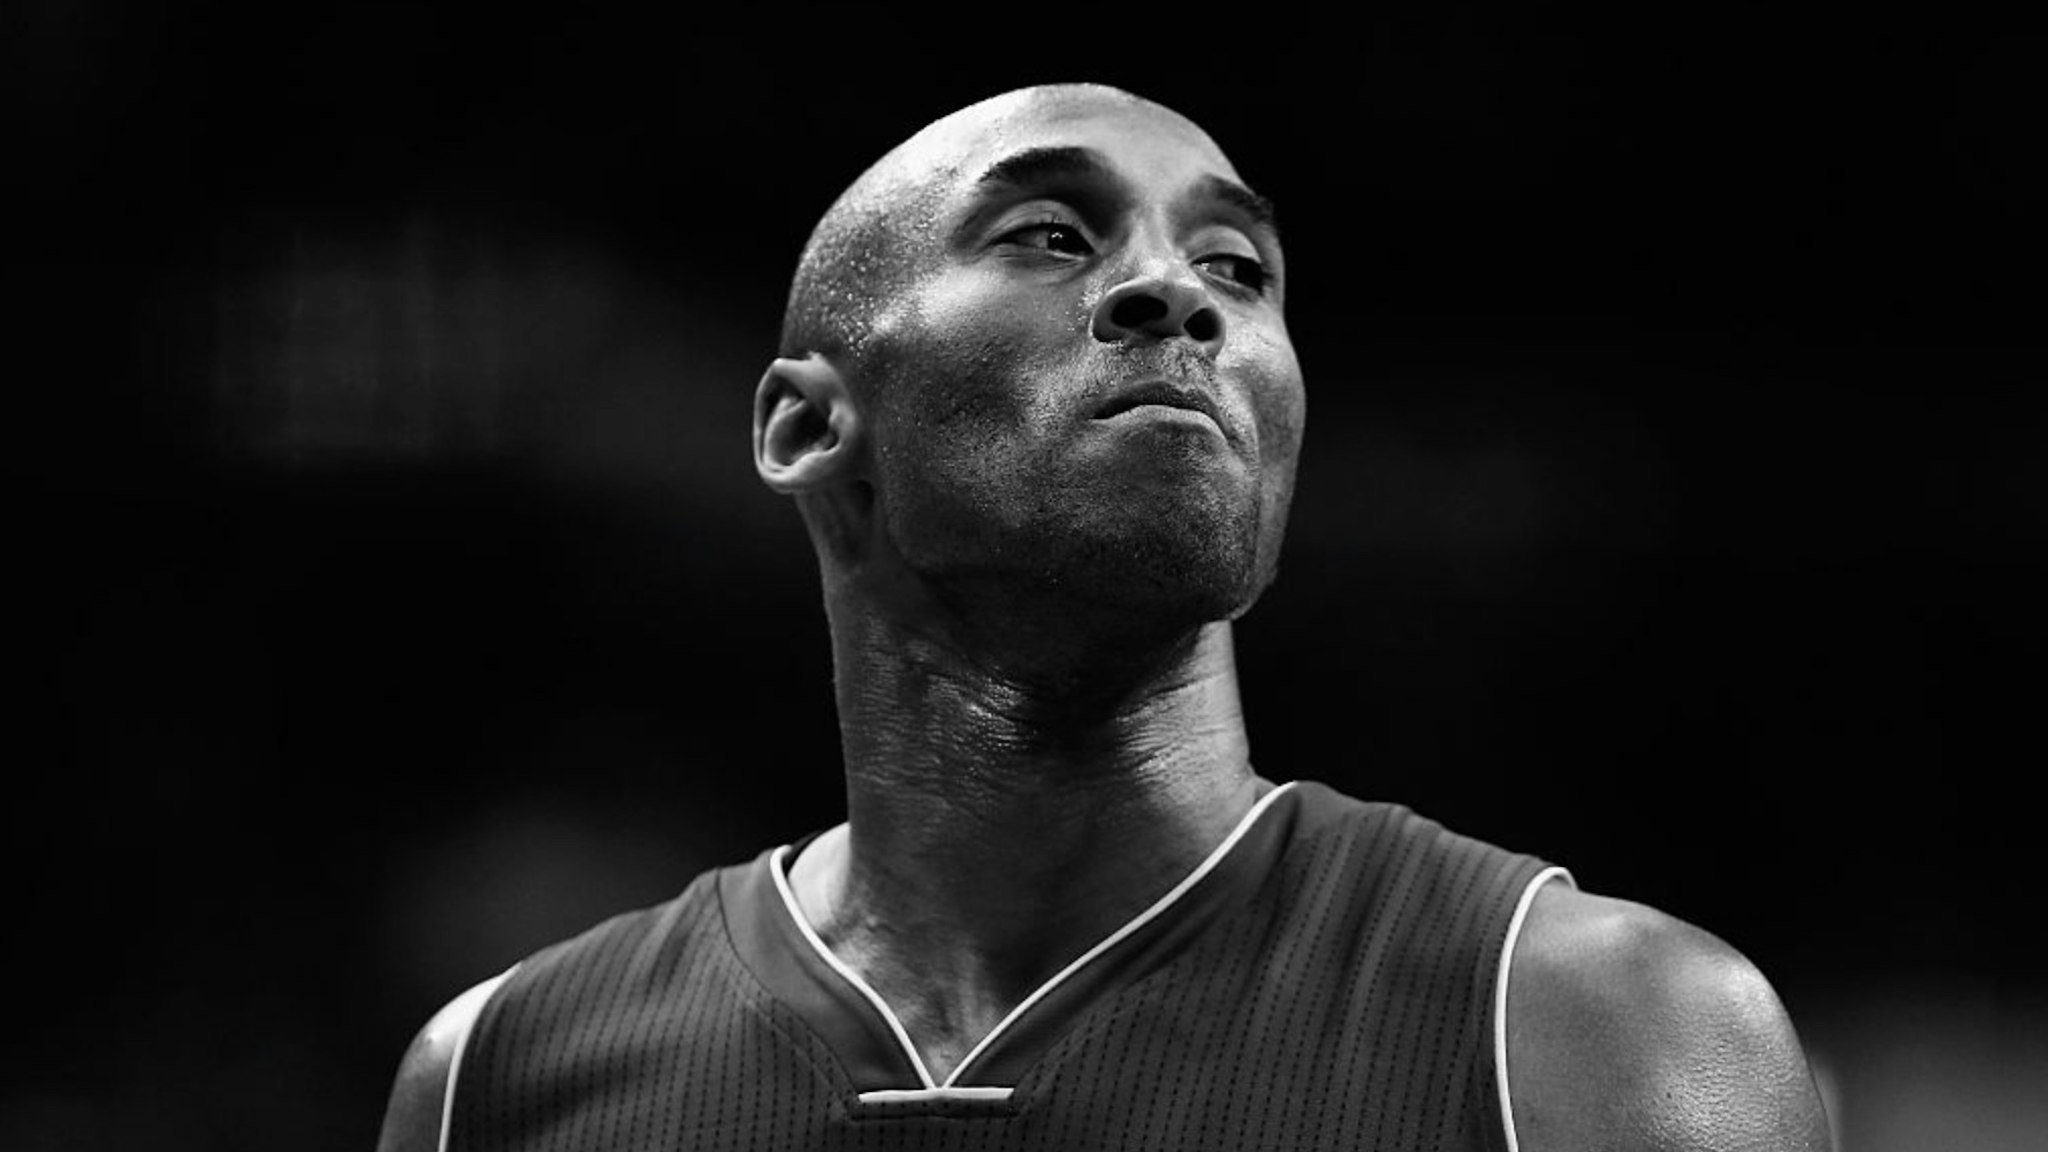 Kobe Bryant #24 of the Los Angeles Lakers looks on against the Washington Wizards in the first half at Verizon Center on December 2, 2015 in Washington, DC.